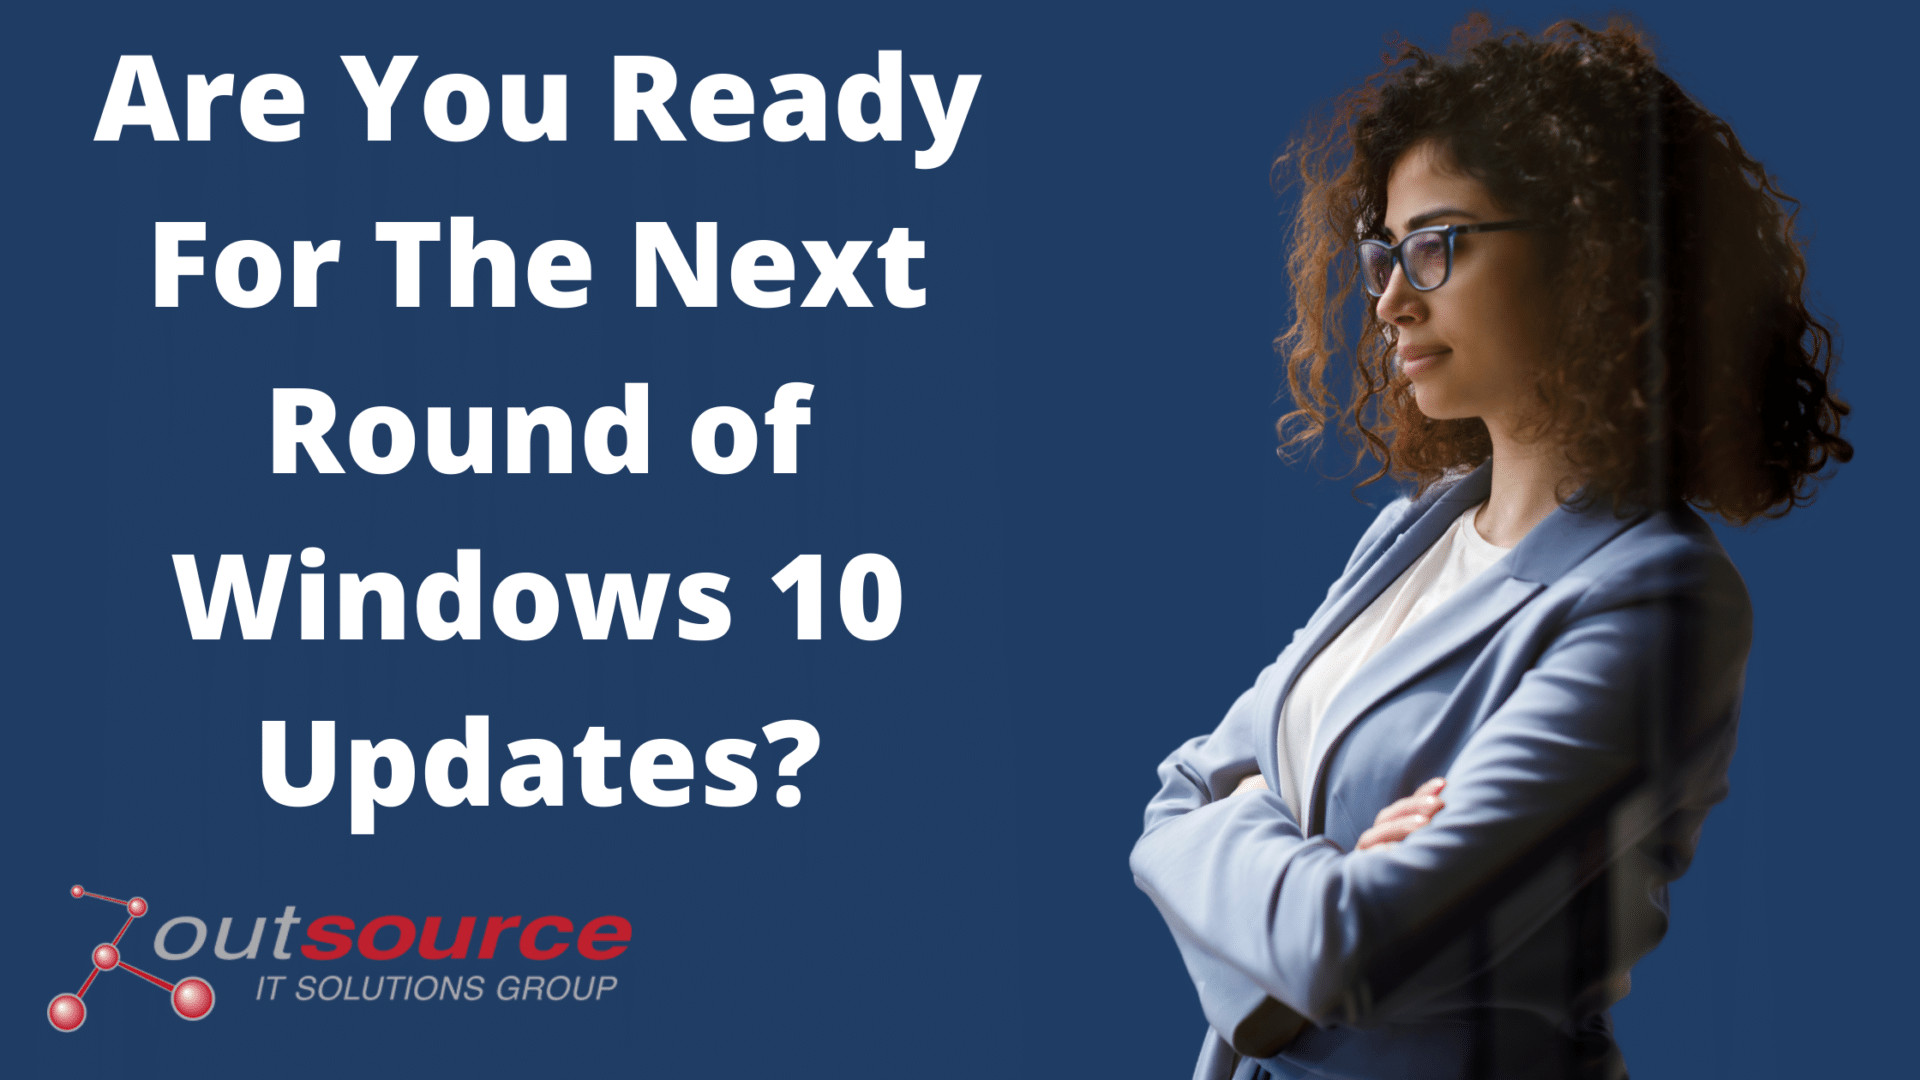 Are You Ready For The Next Round of Windows 10 Updates